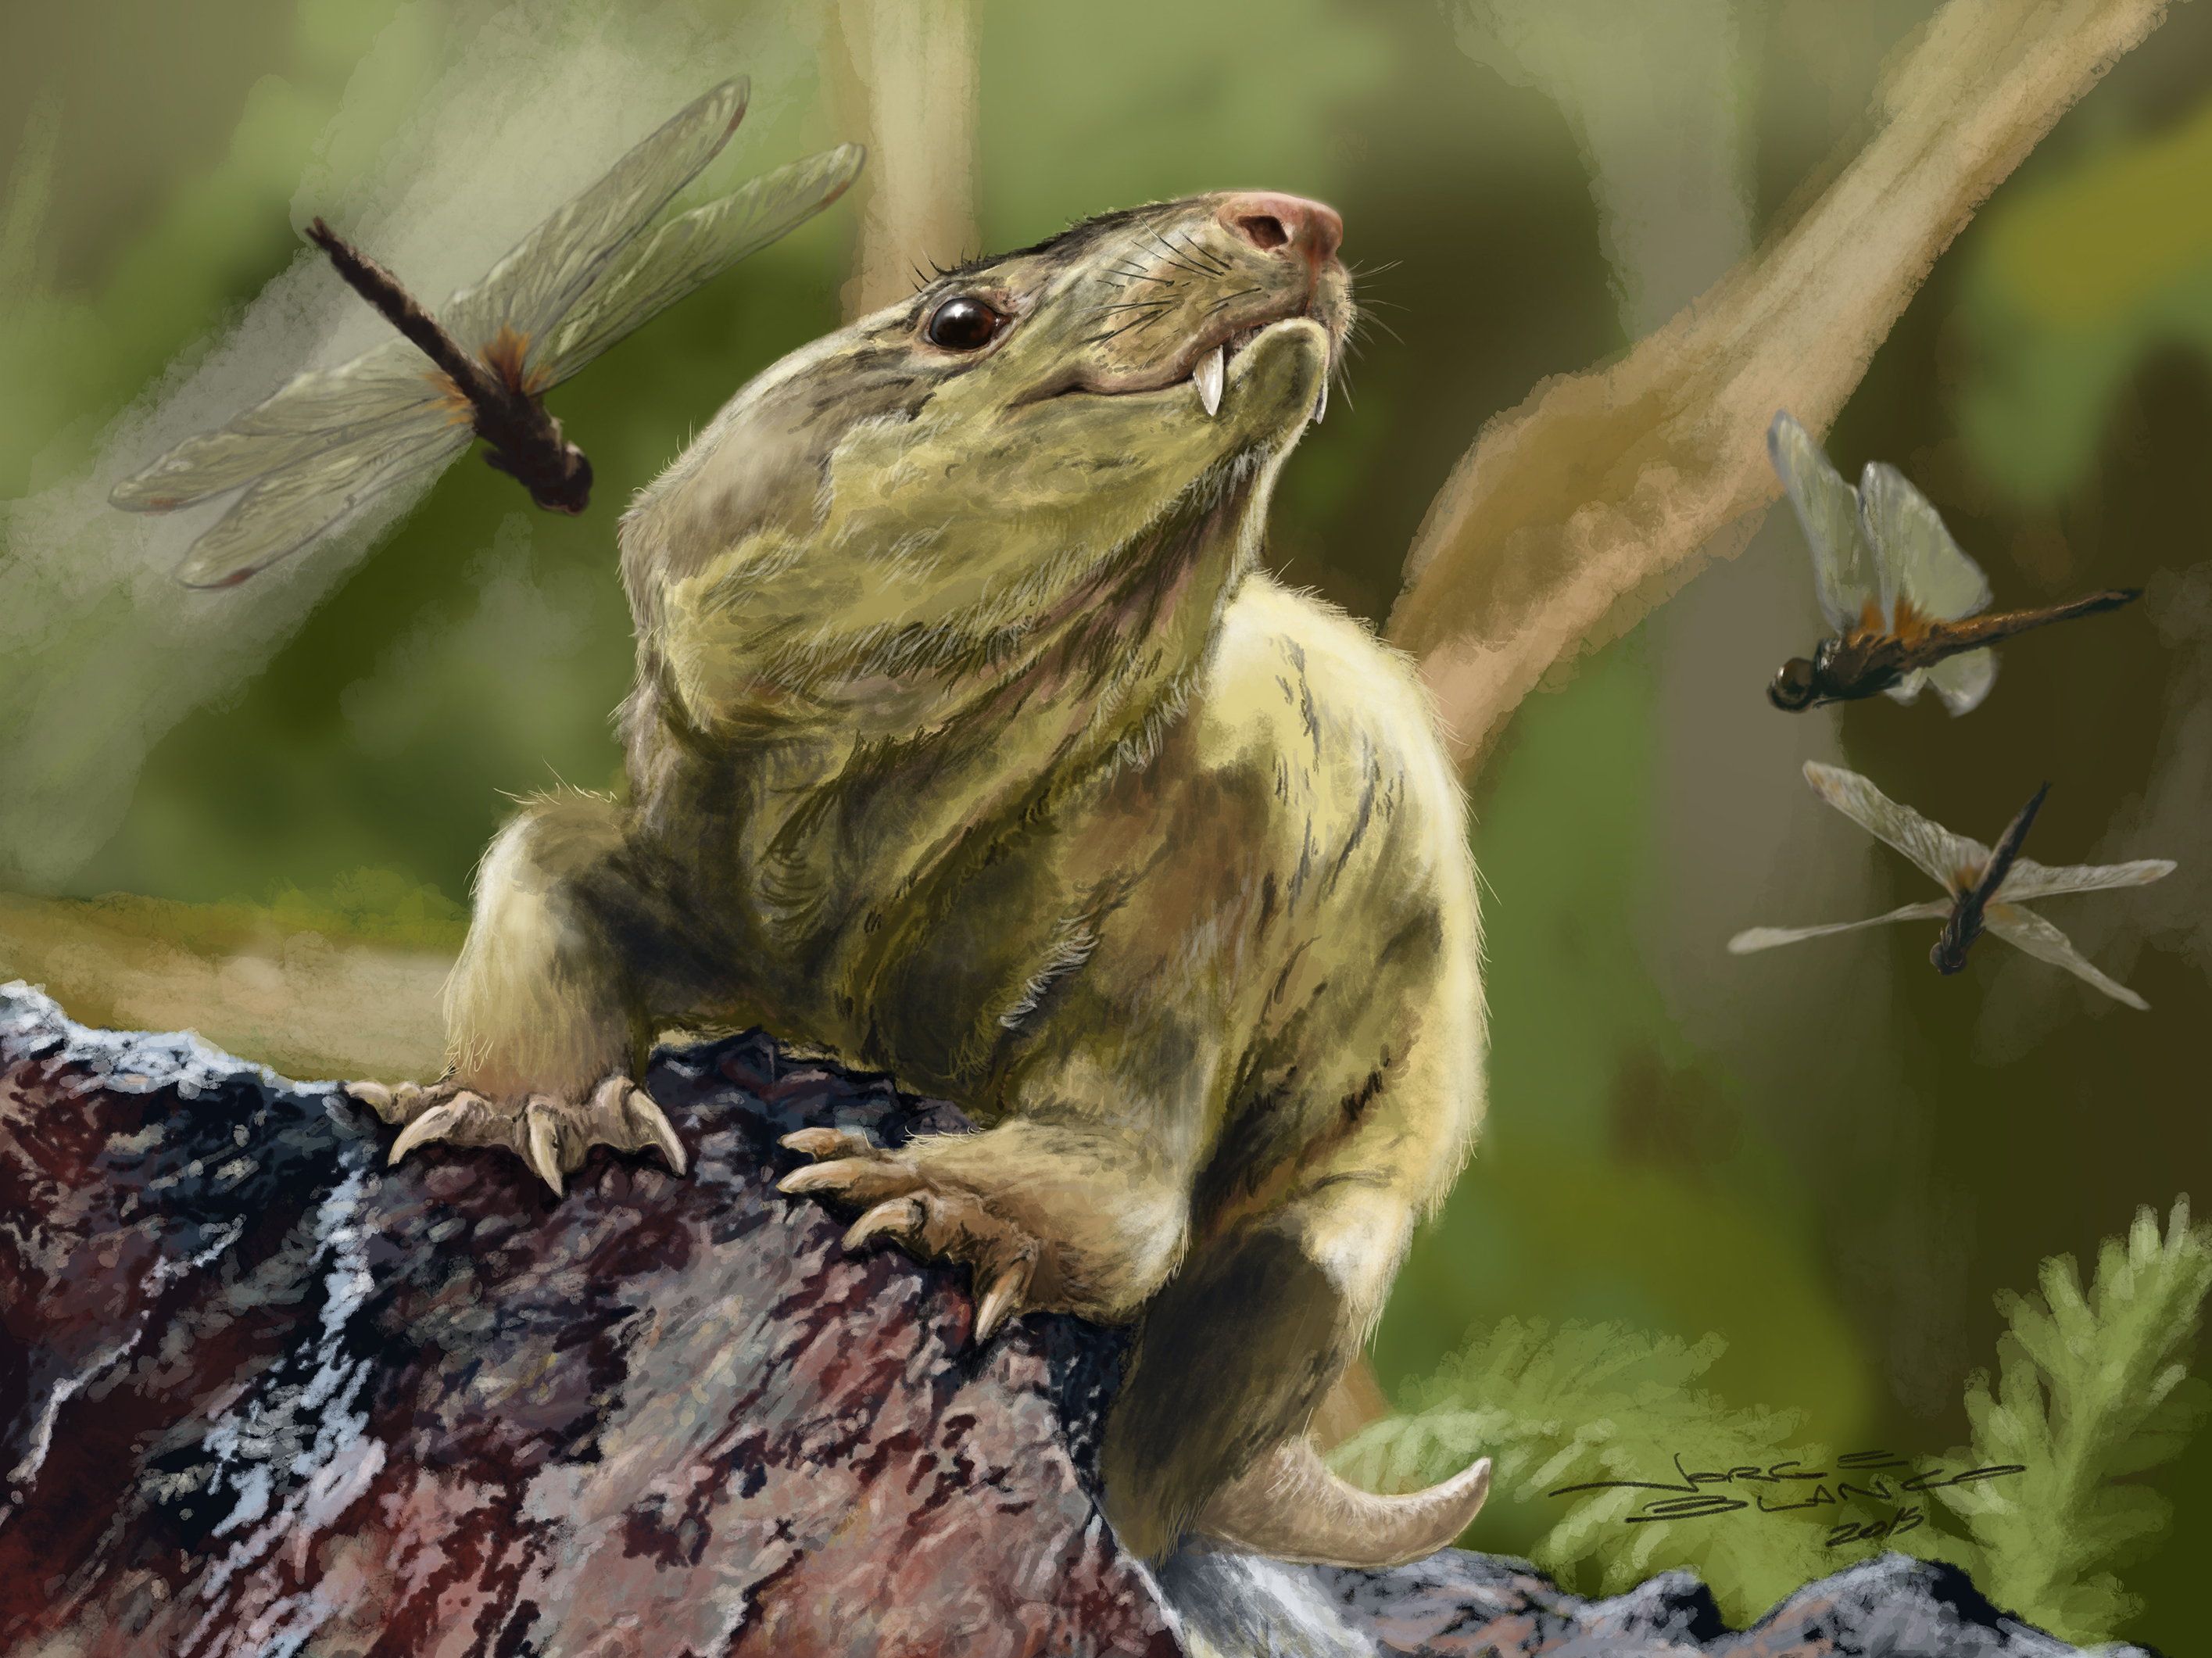 A painting of a rodent-like mammal with tusks watching dragonflies in a natural setting.